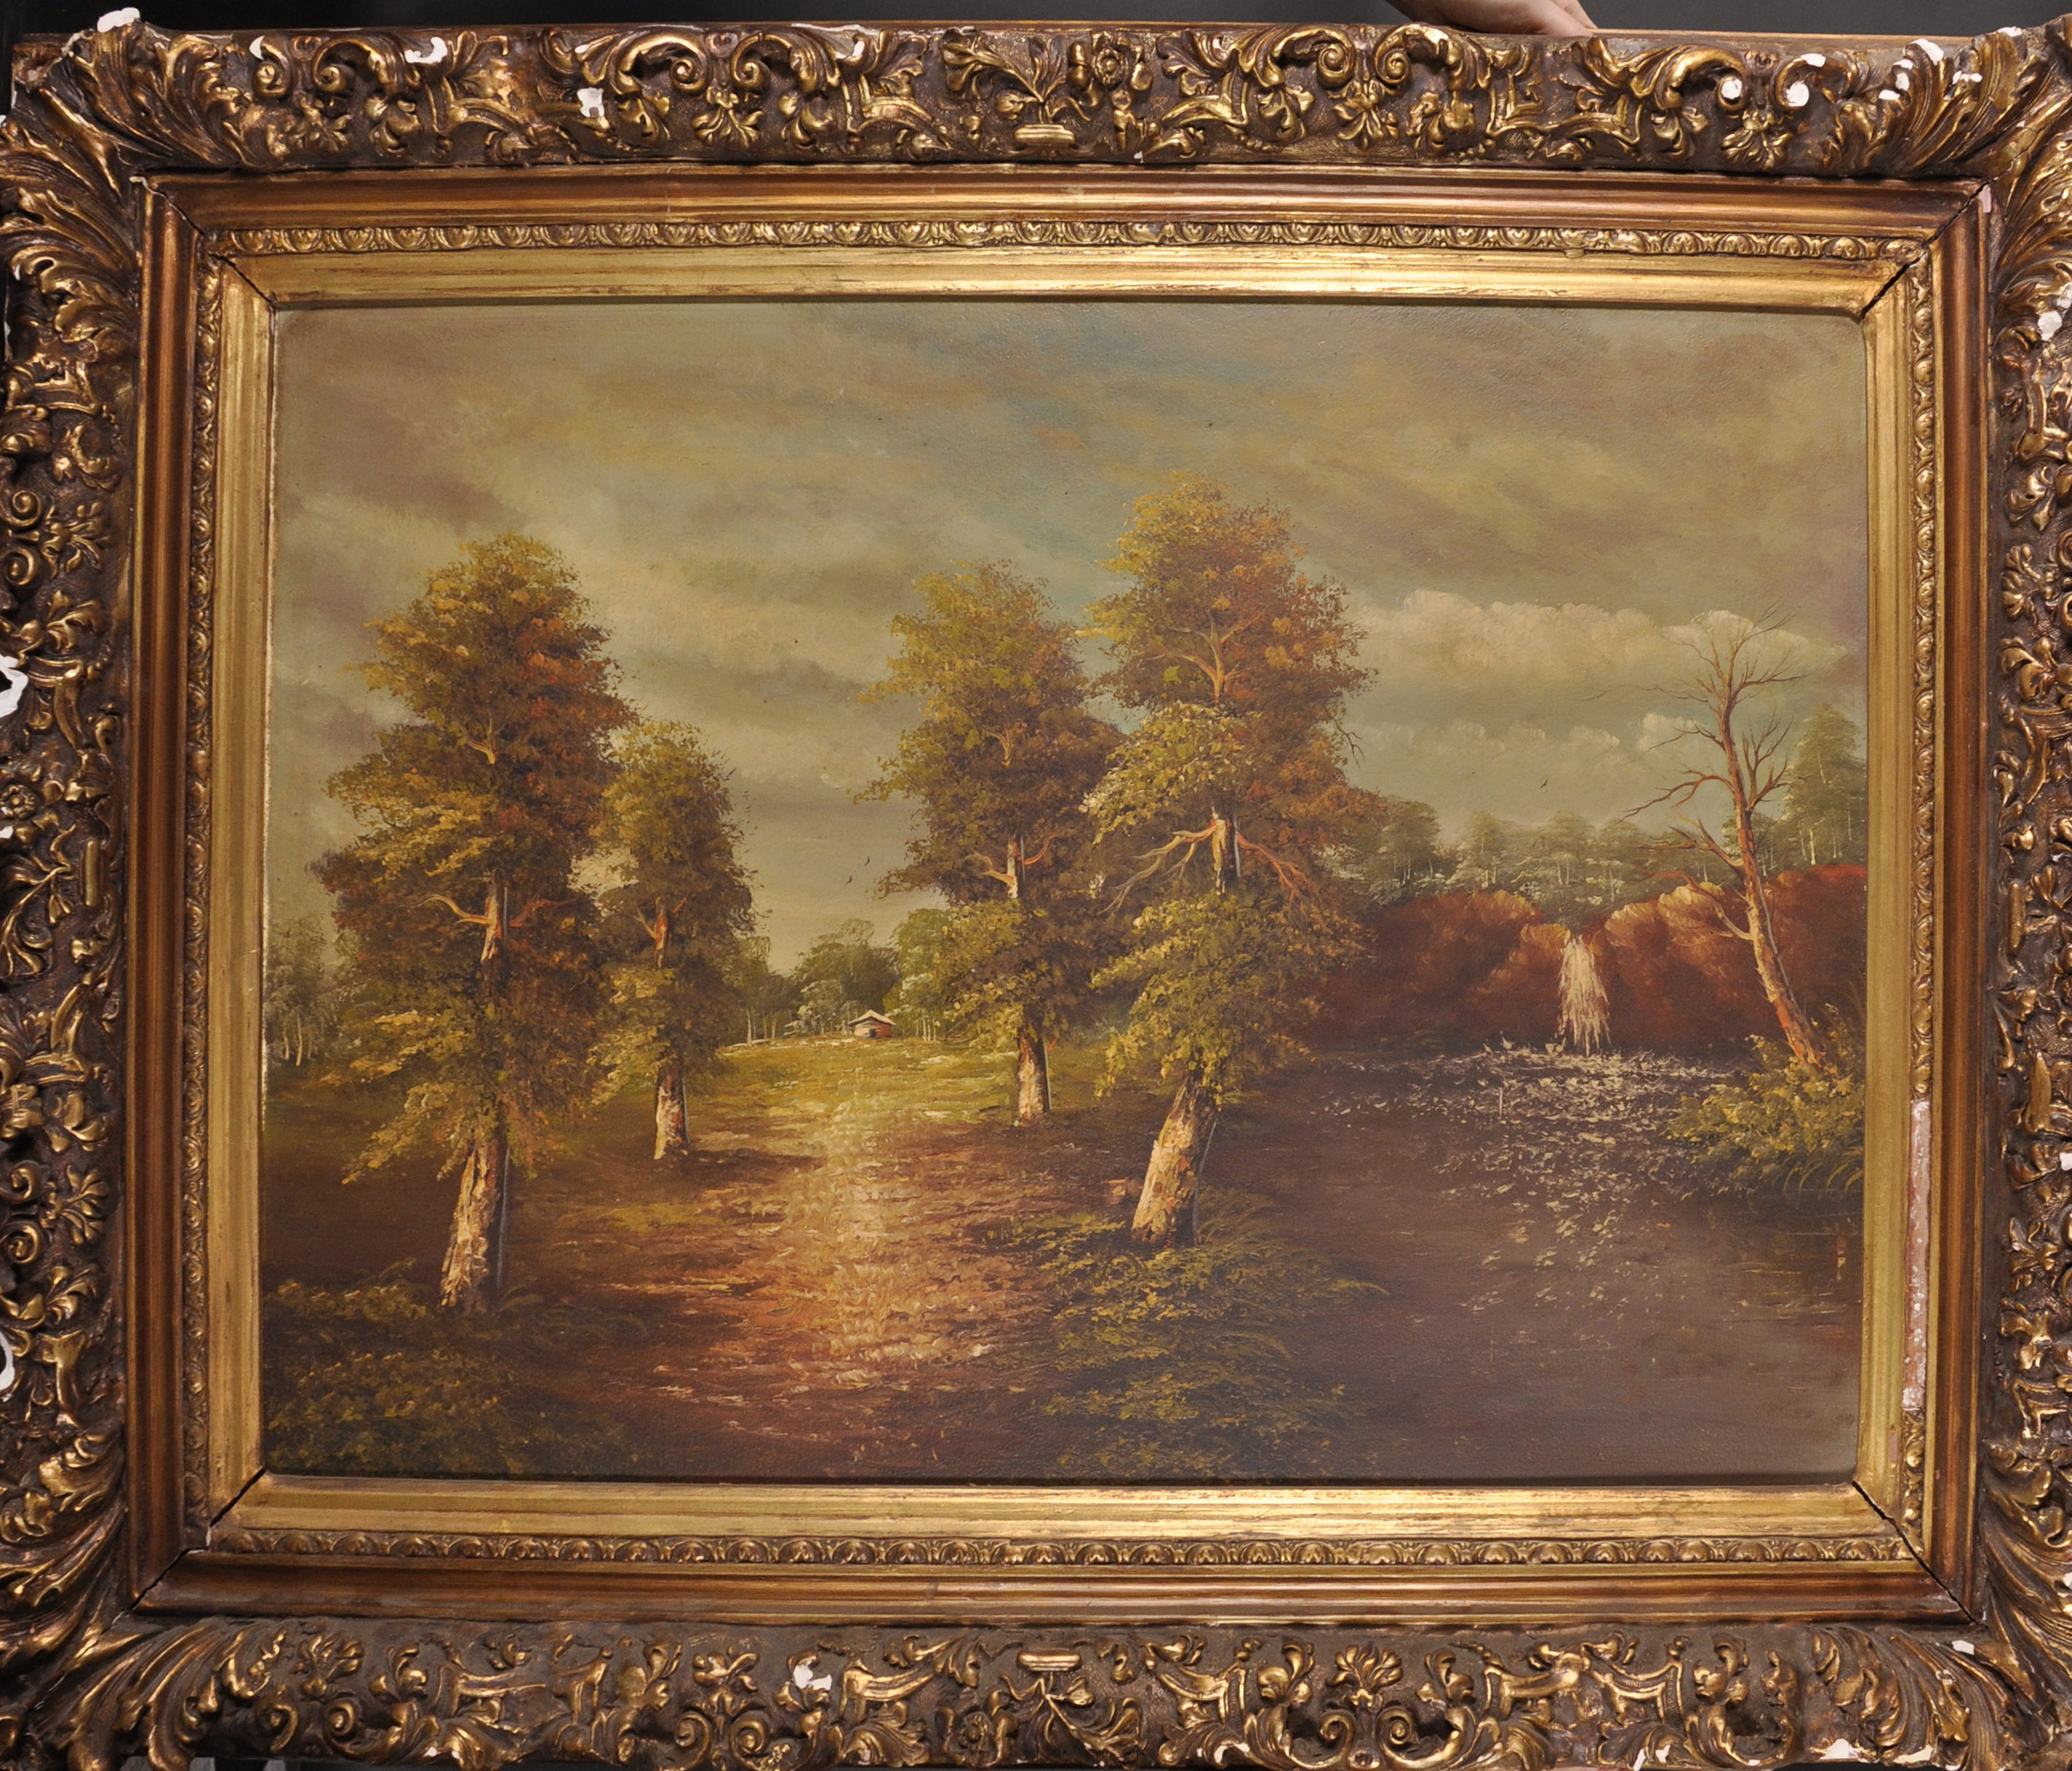 Late 19th Century Continental School. A River Landscape, Oil on Canvas, 28" x 39.5".